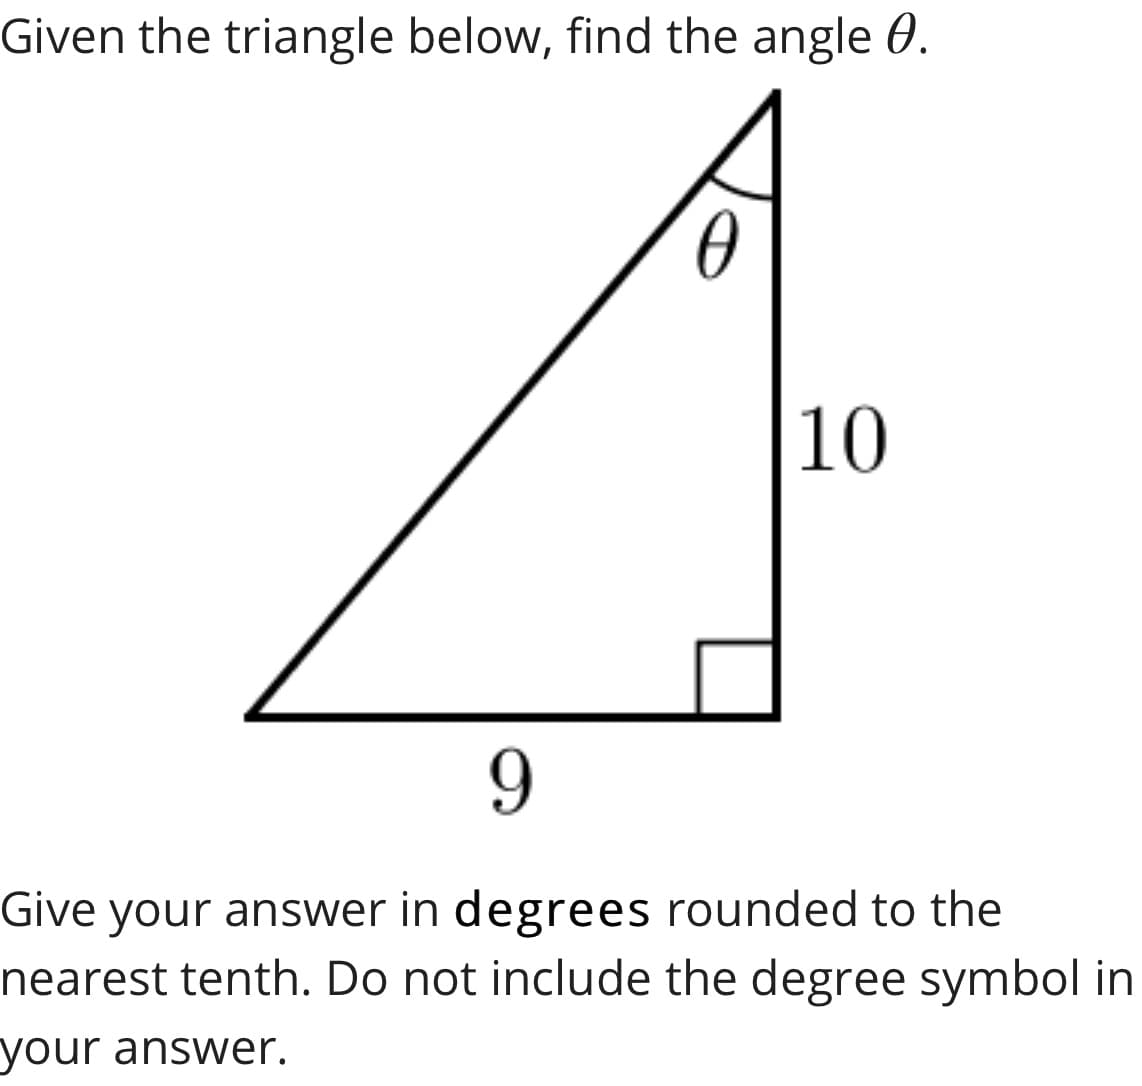 Given the triangle below, find the angle 0.
10
Give your answer in degrees rounded to the
nearest tenth. Do not include the degree symbol in
your answer.
